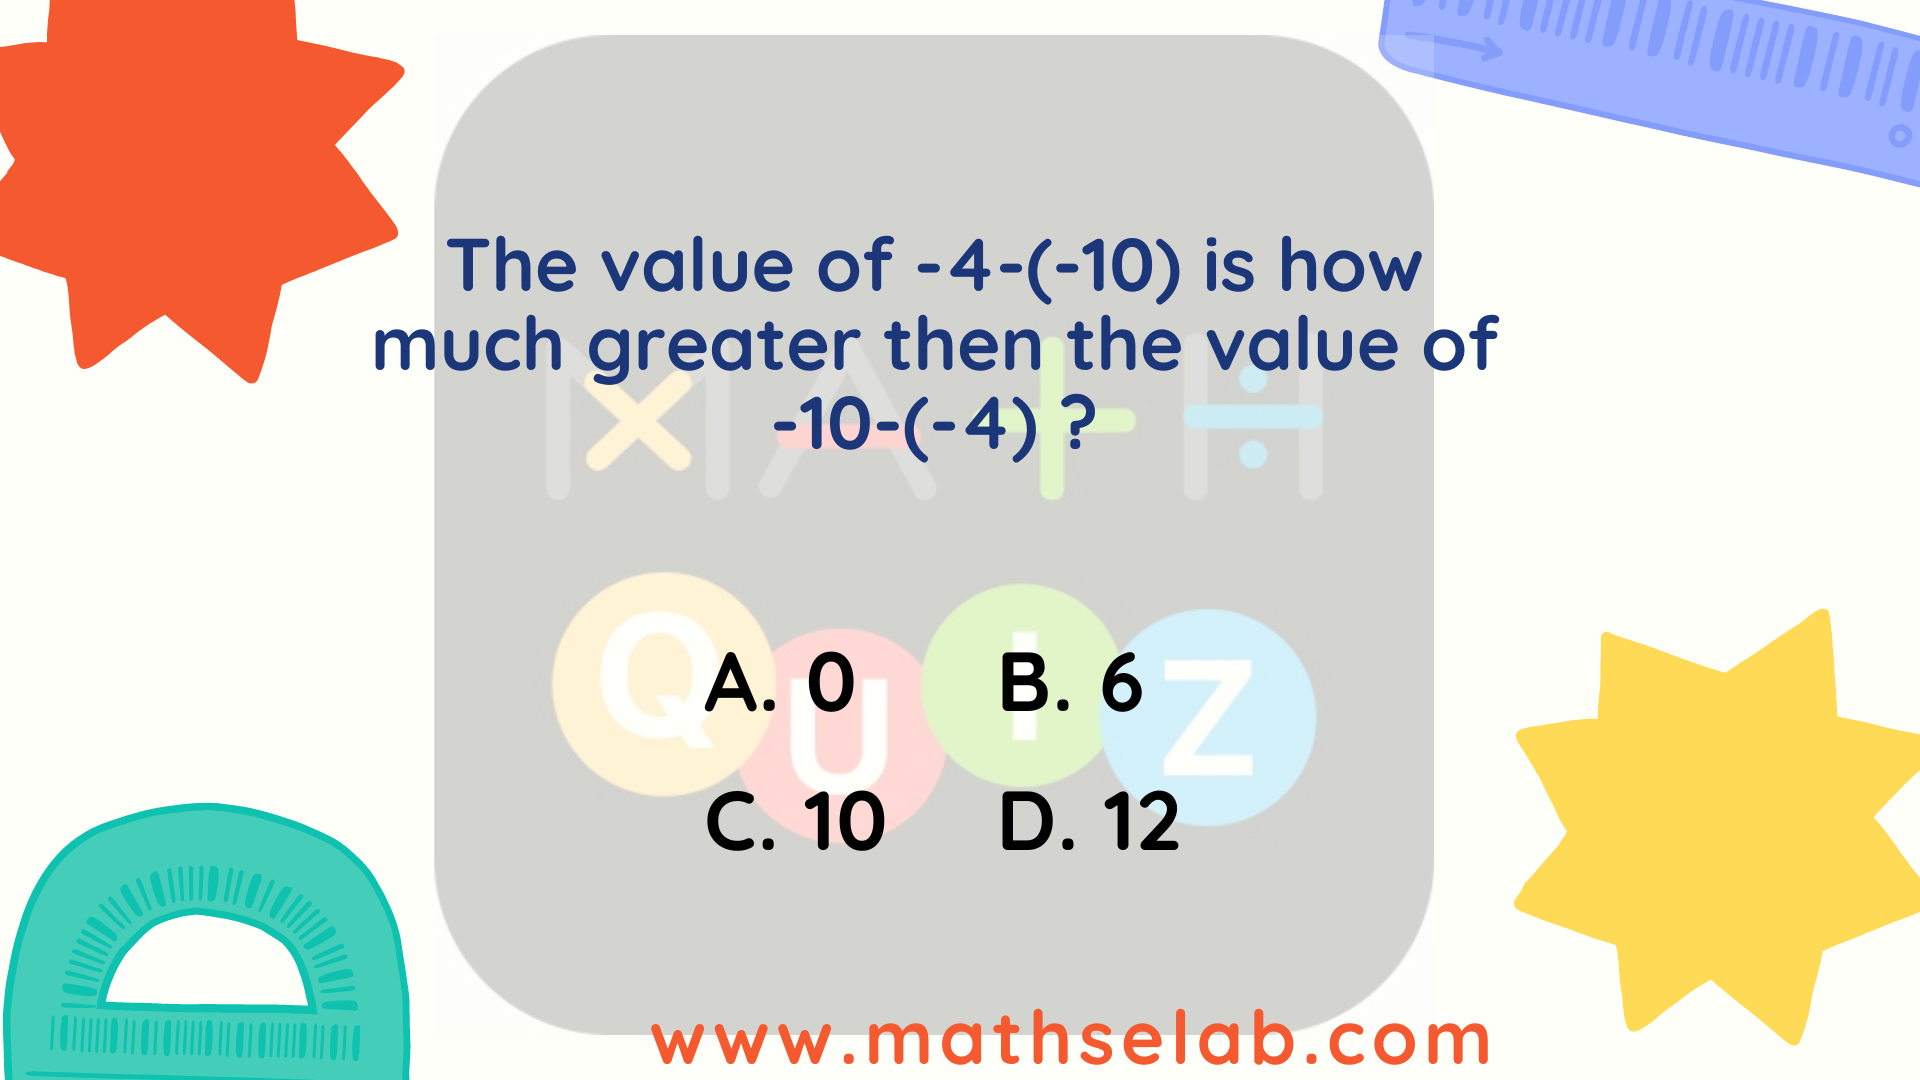 The value of -4-(-10) is how much greater then the value of -10-(-4) ?